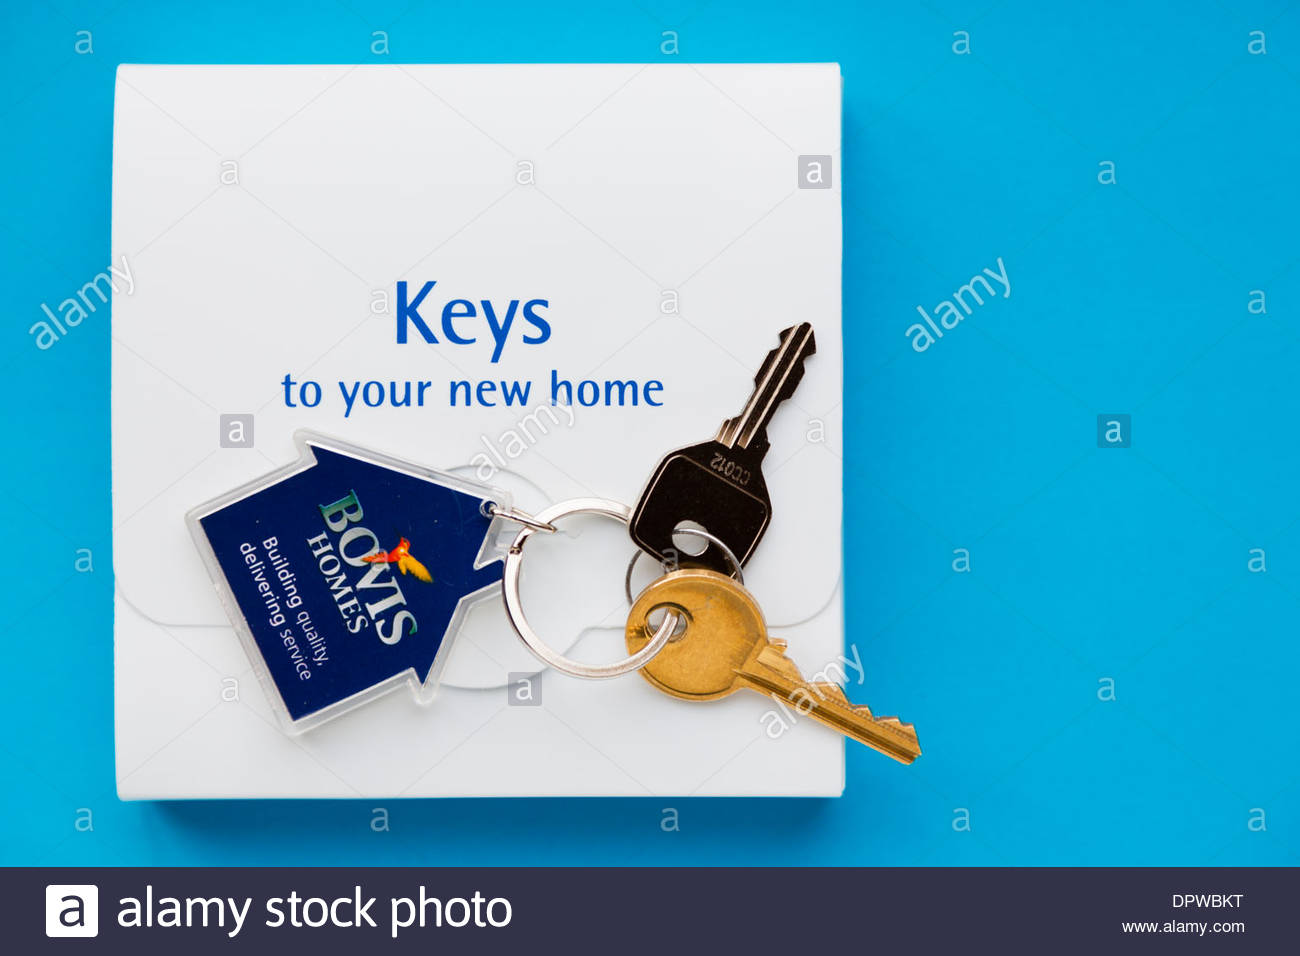 New house keys with box, Bovis Homes, on blue background Stock Photo